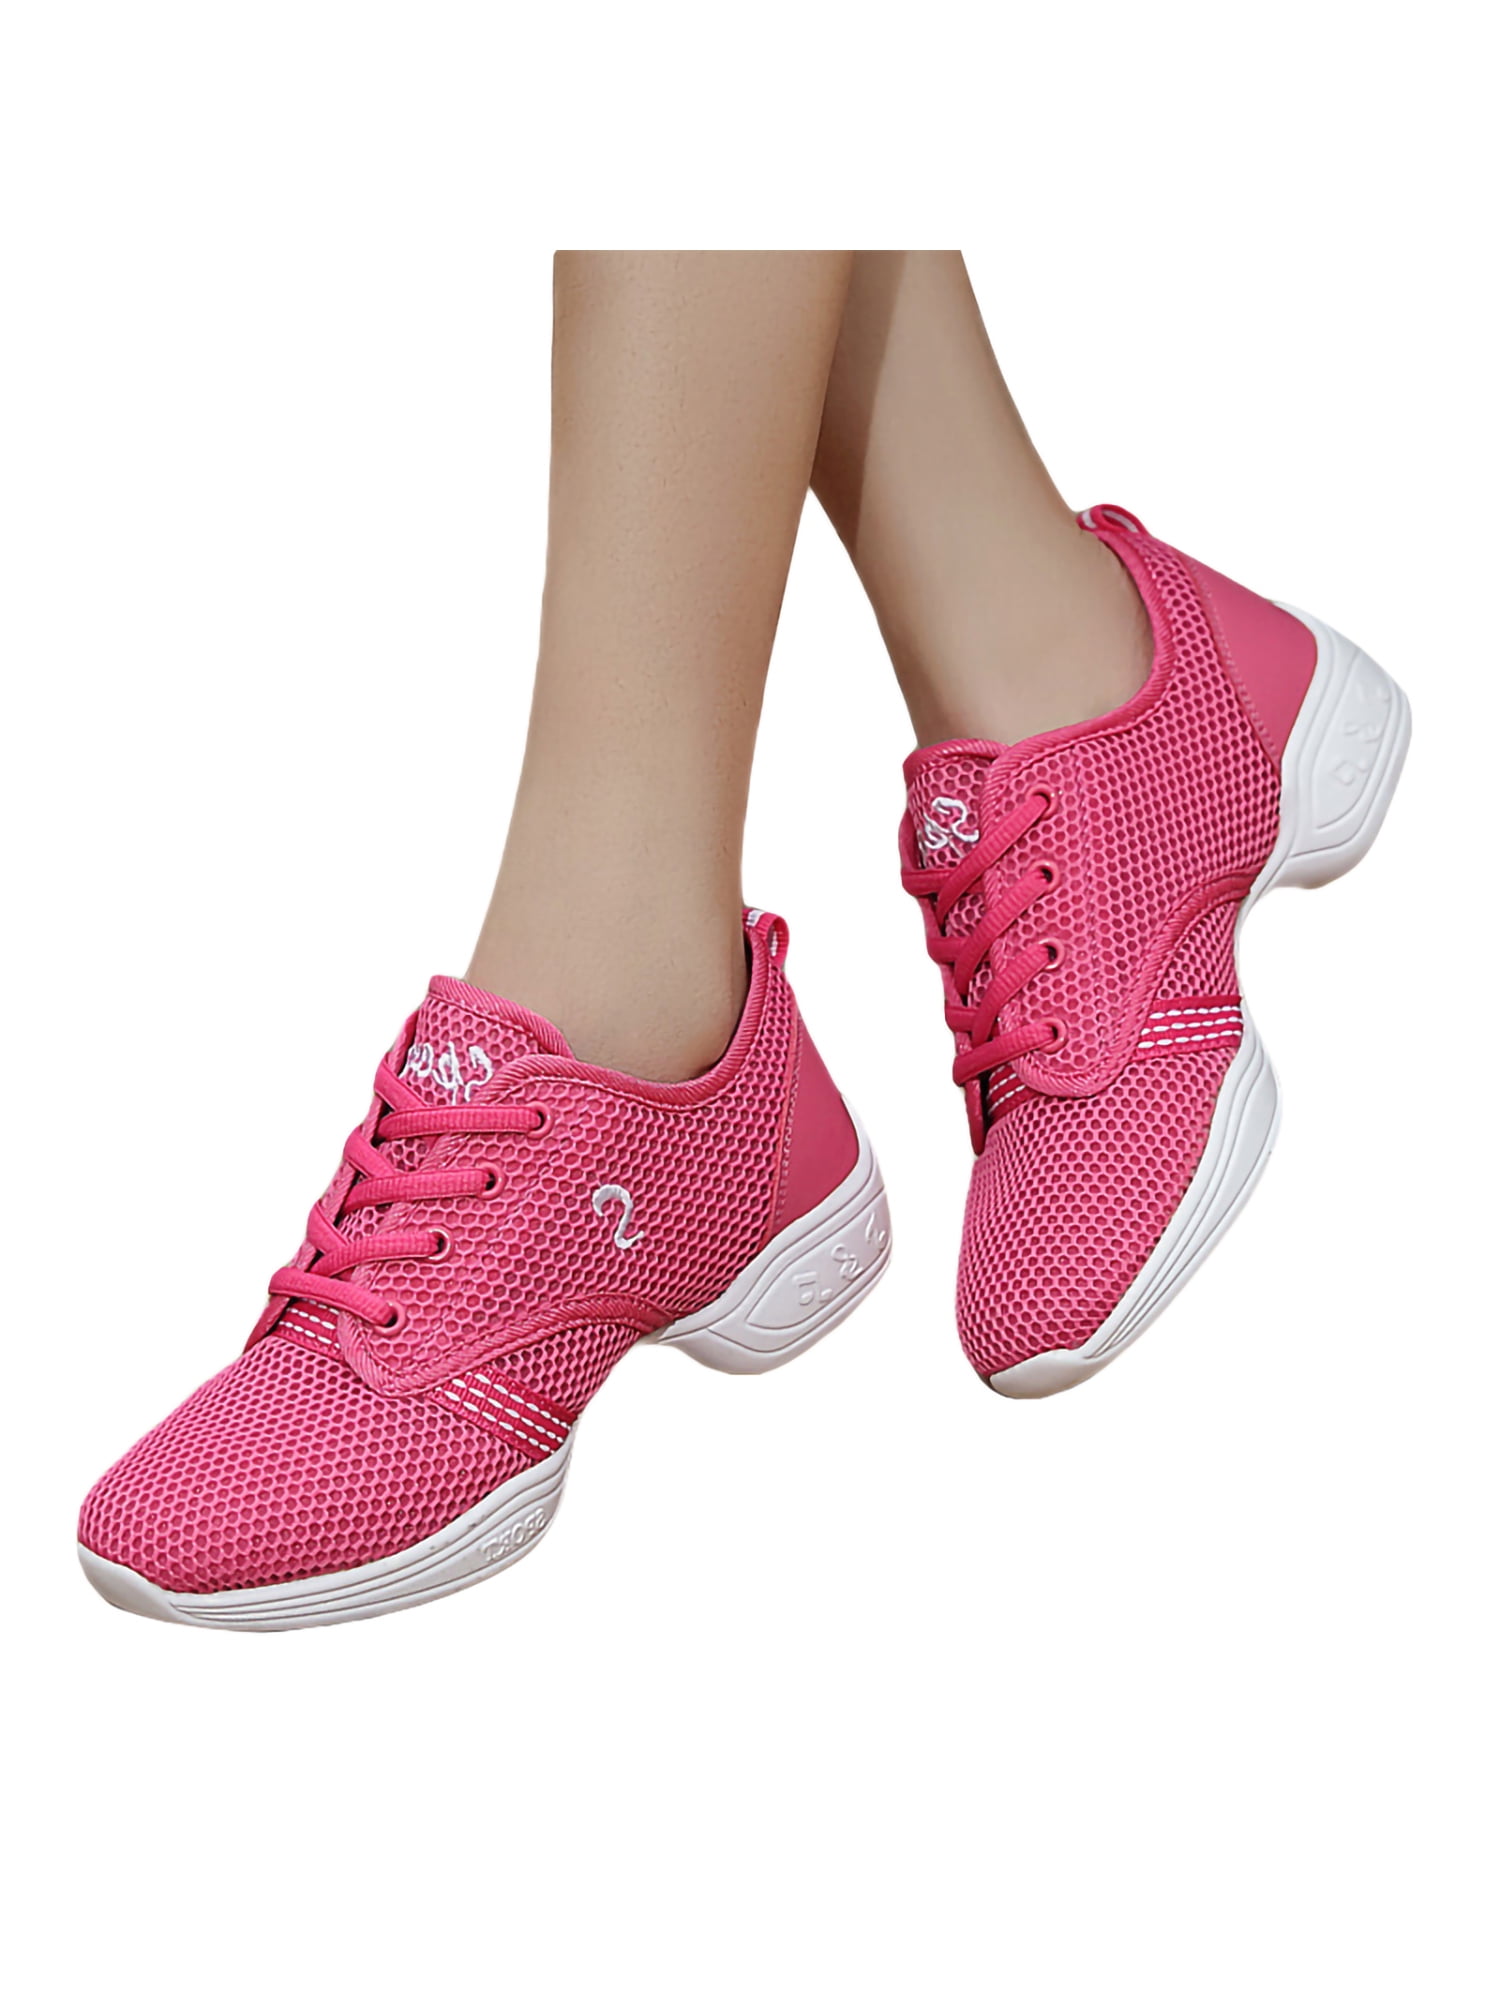 Shoes Sneakers Lace-Up Sneakers work out Lace-Up Sneaker red-white athletic style 